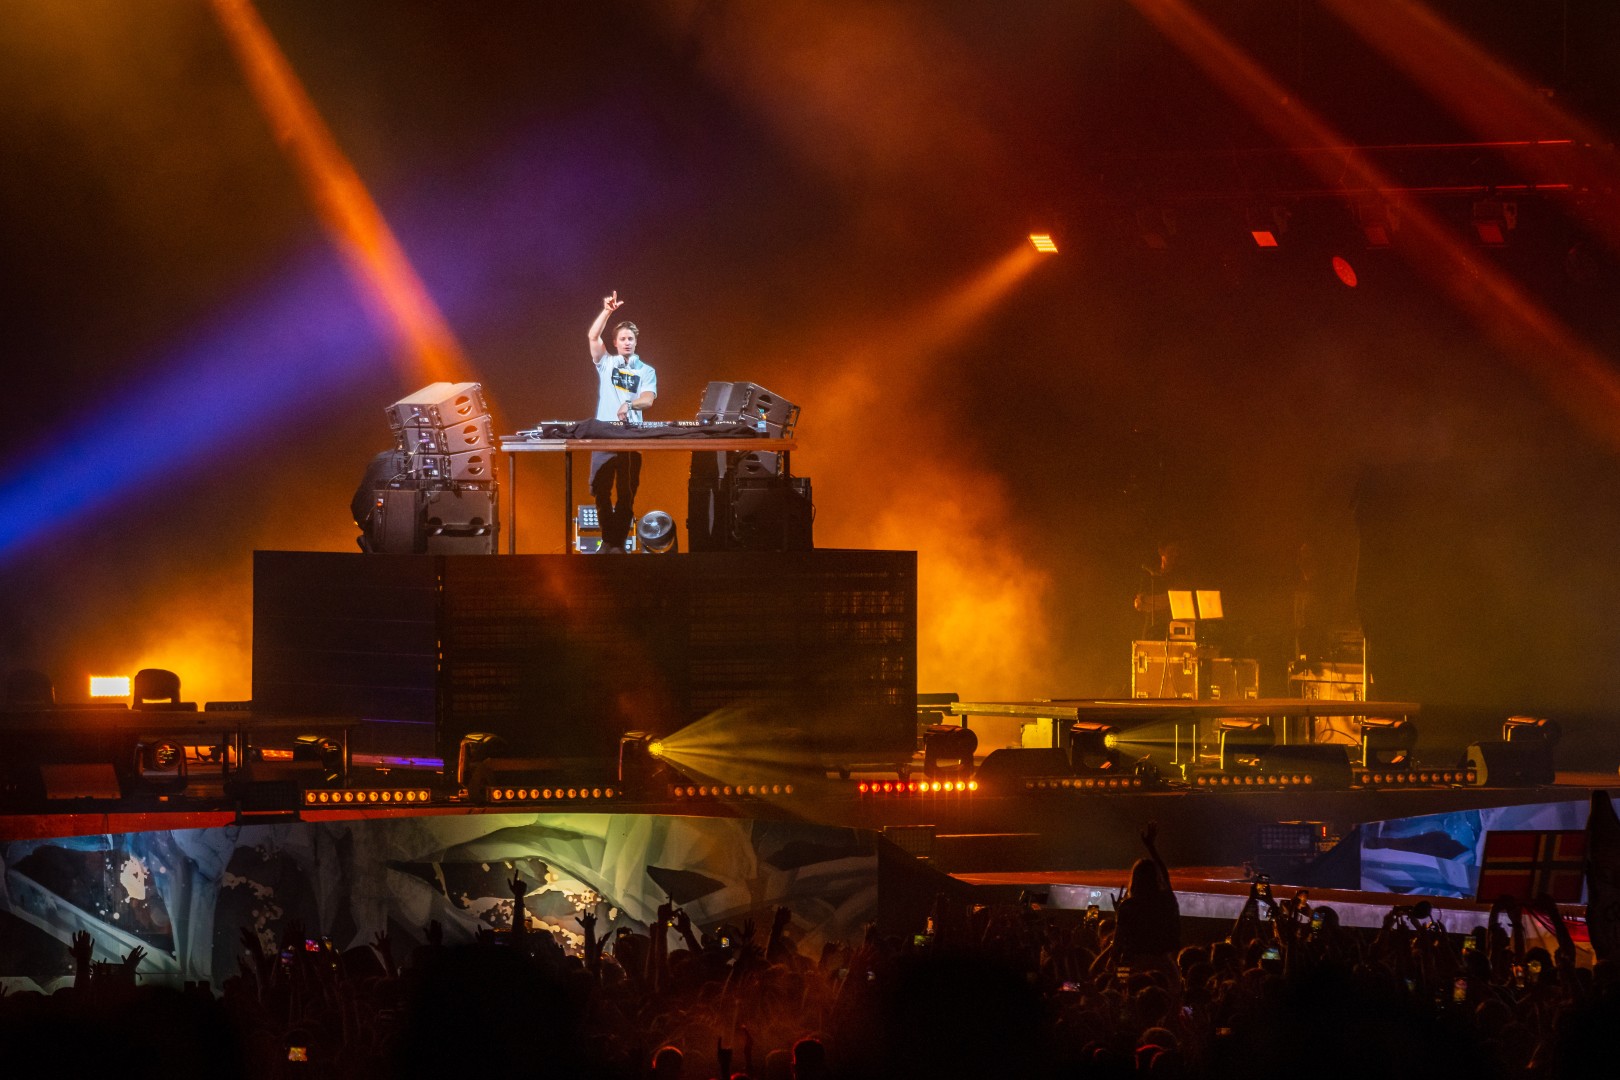 Kygo at Cluj Arena in Cluj-Napoca on August 6, 2022 (eb4671e548)